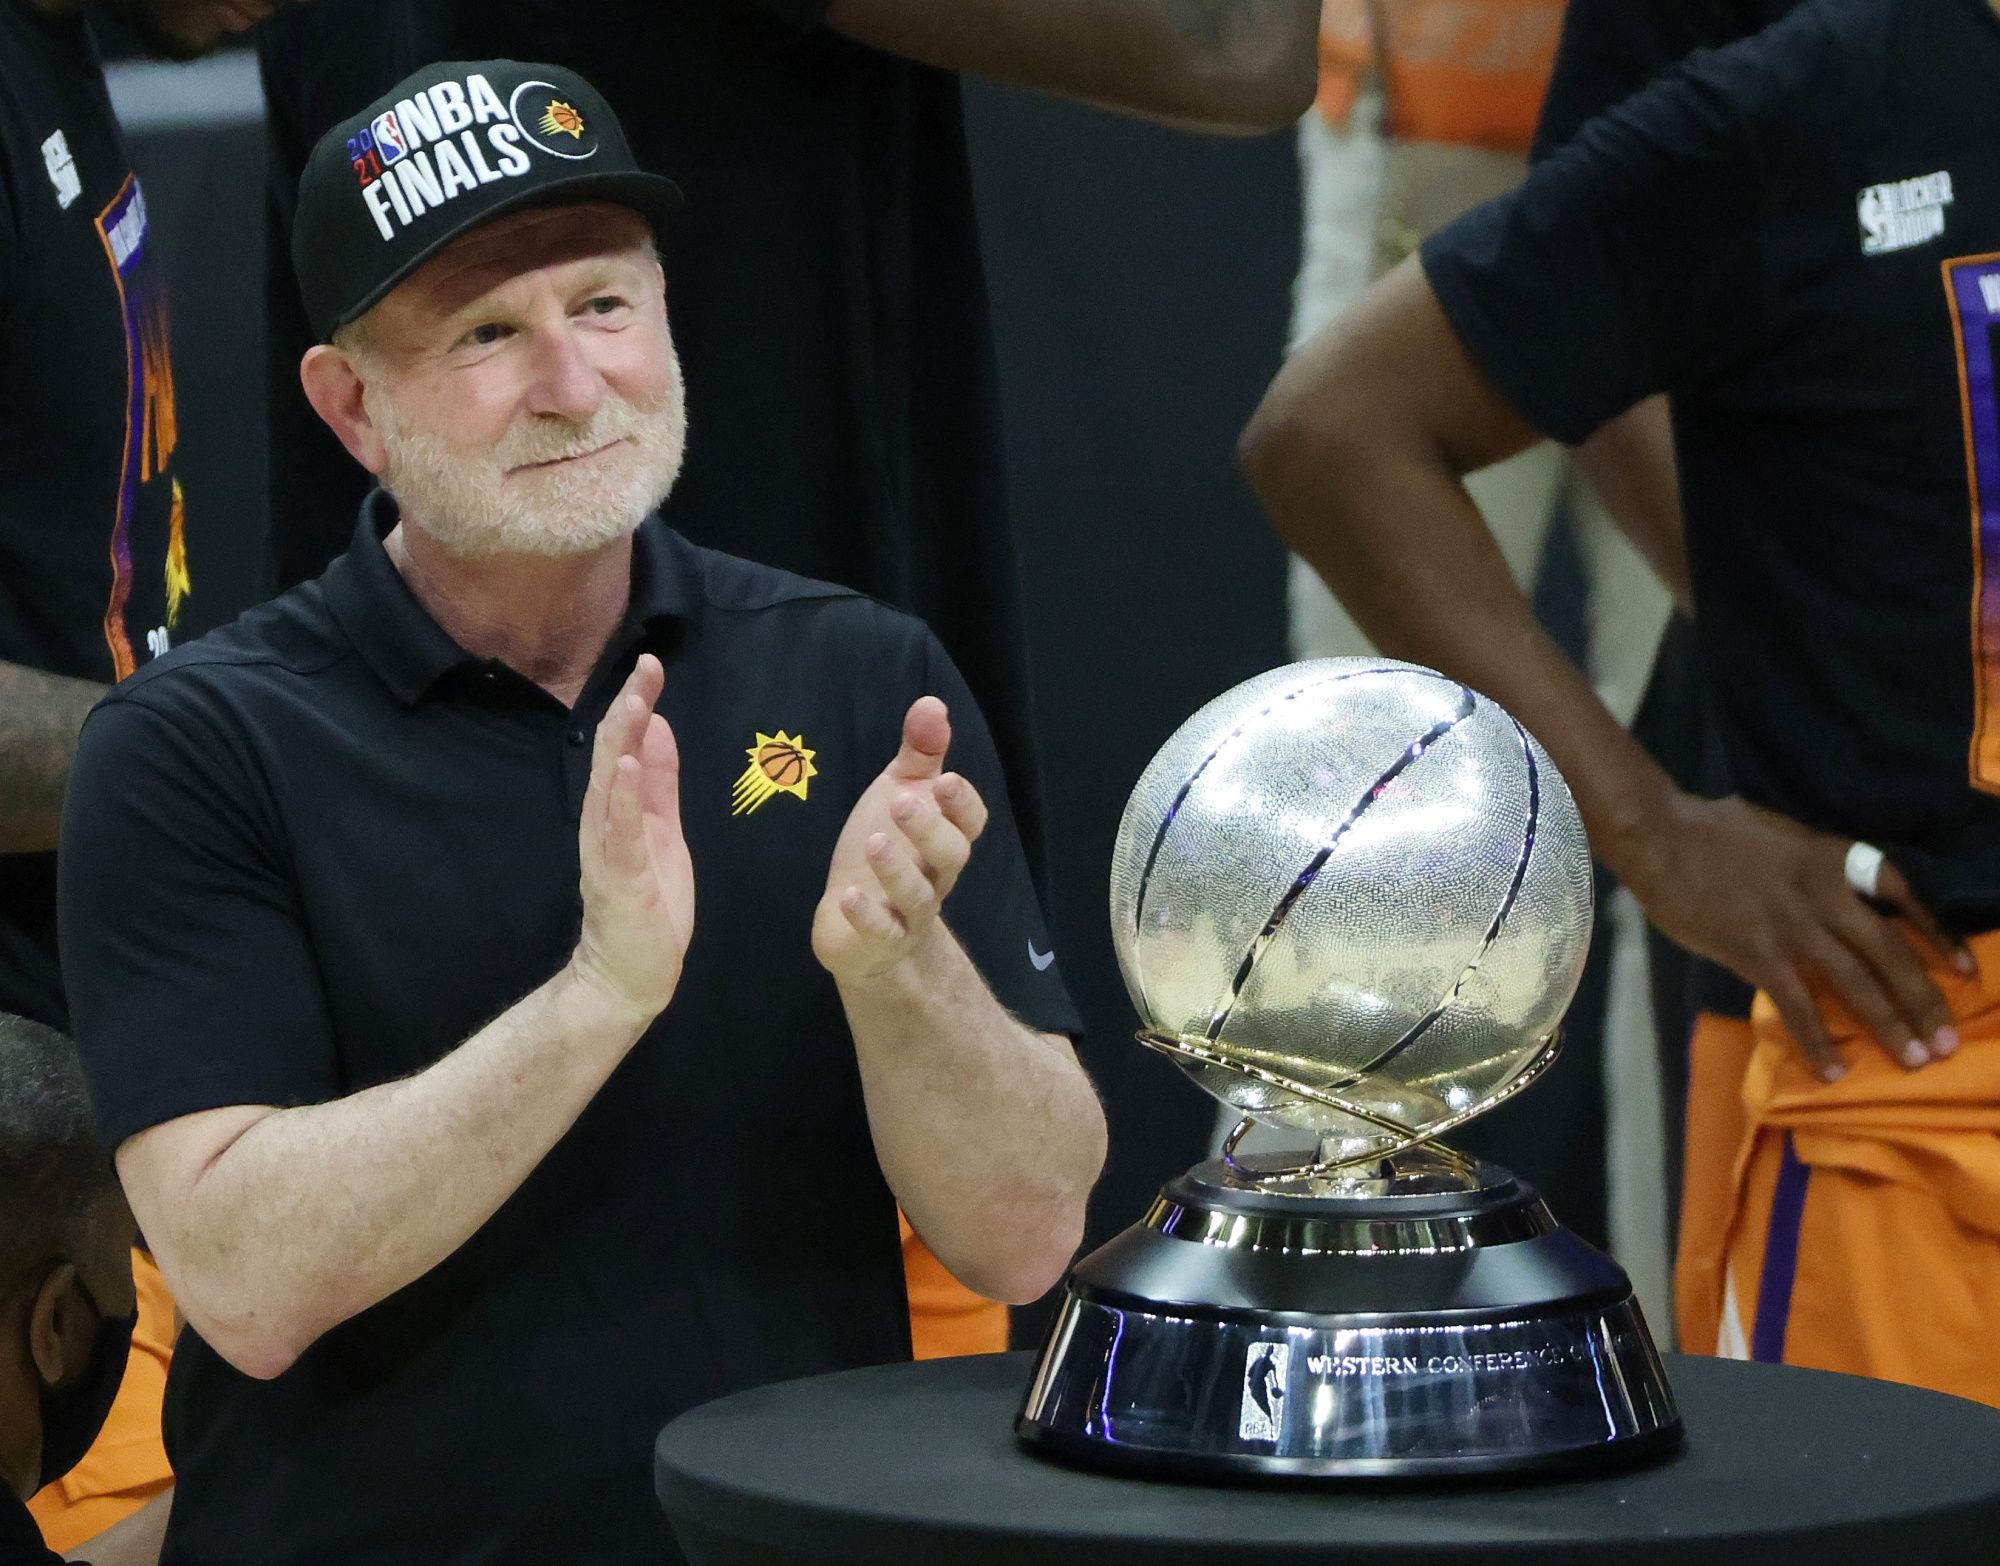 Phoenix Suns and Mercury Owner Robert Sarver Says He's Selling Franchises  Following Investigation